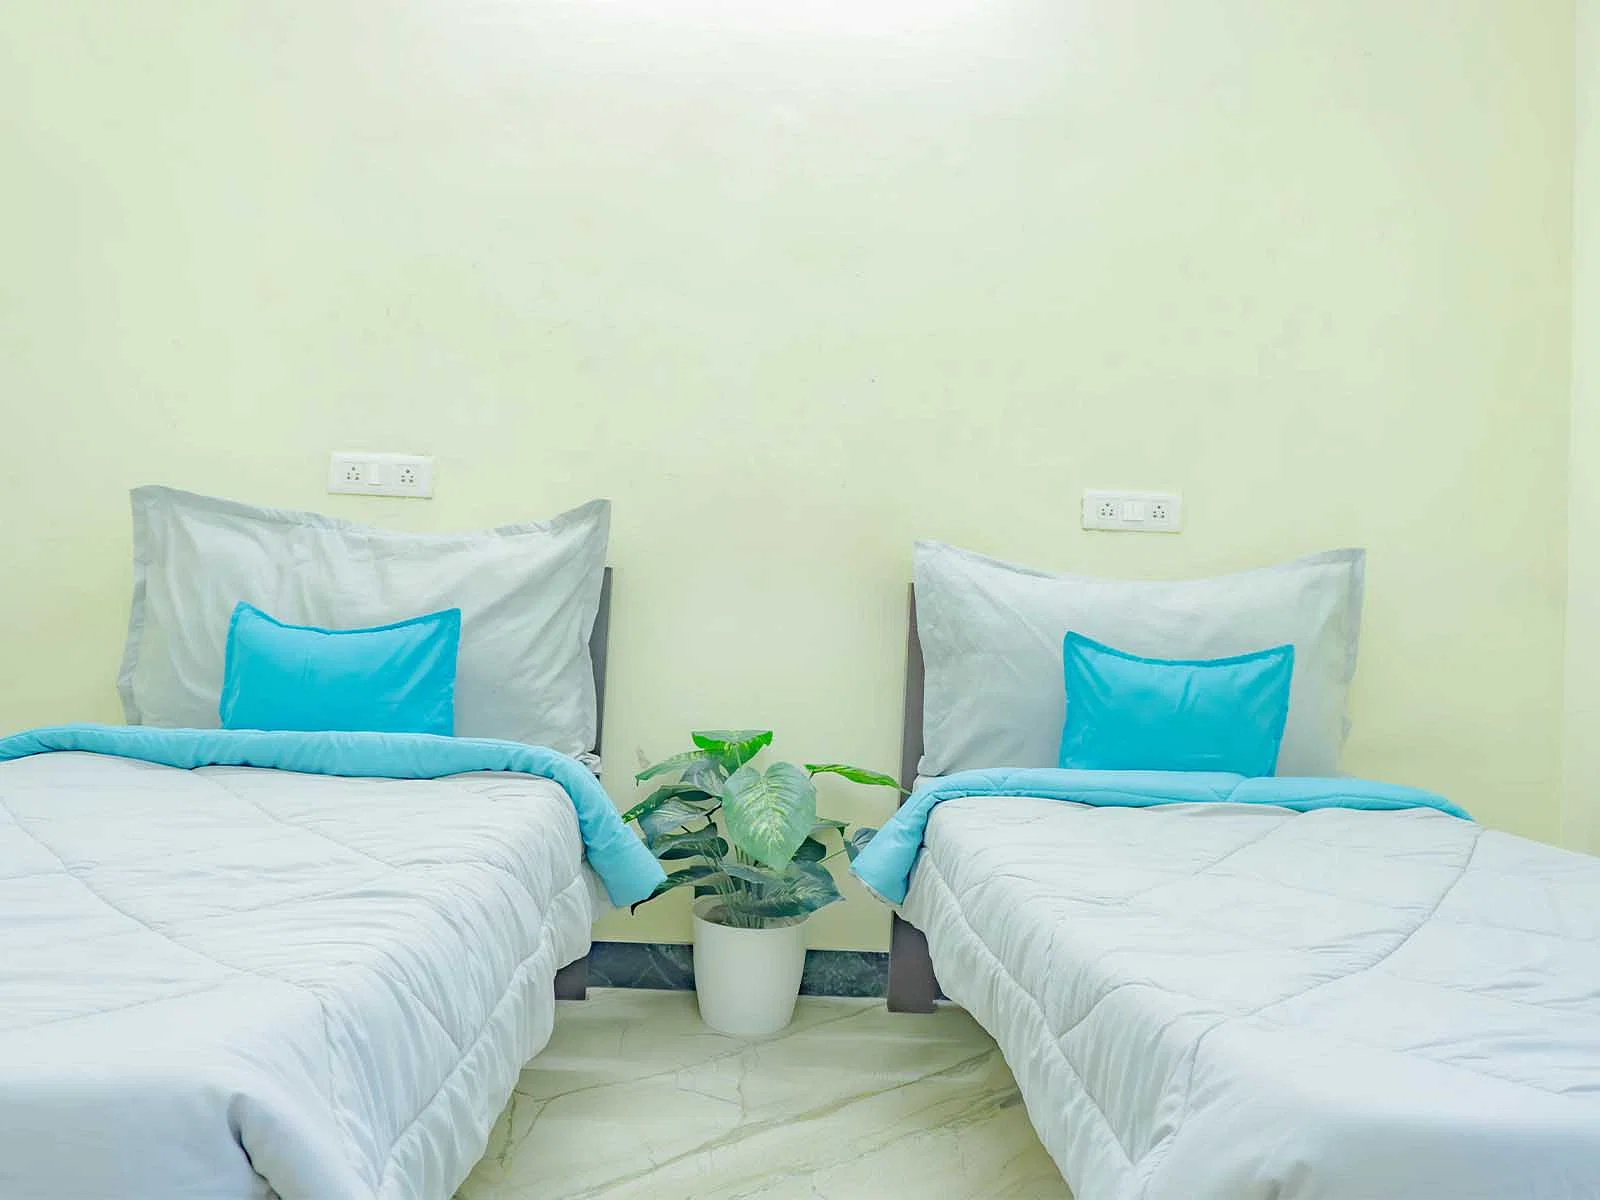 fully furnished Zolo single rooms for rent near me-check out now-Zolo Nook